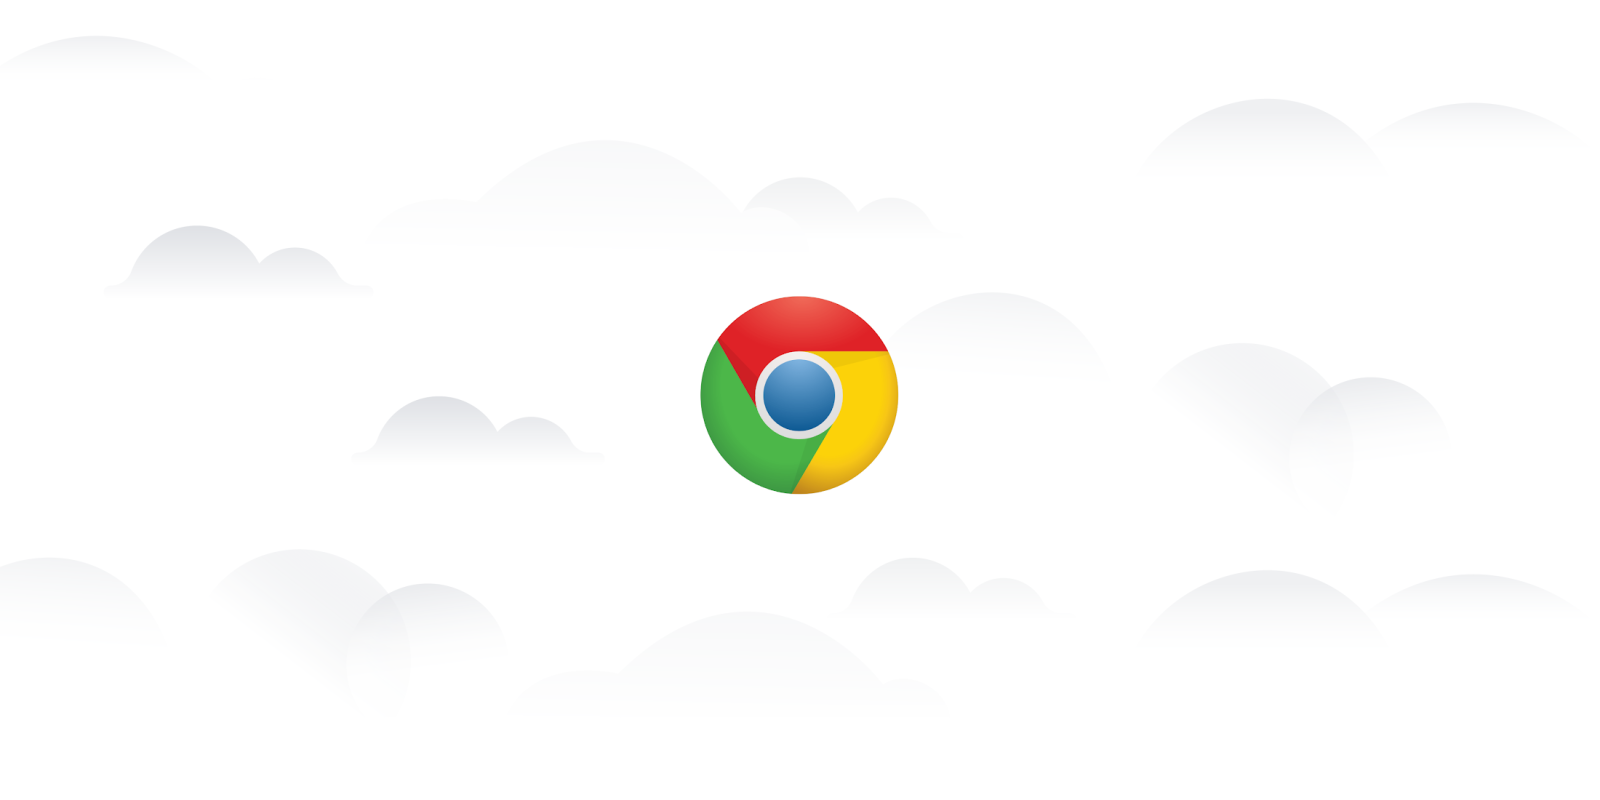 Google to ‘fully support’ Chrome on Windows 7 for at least 18 more months